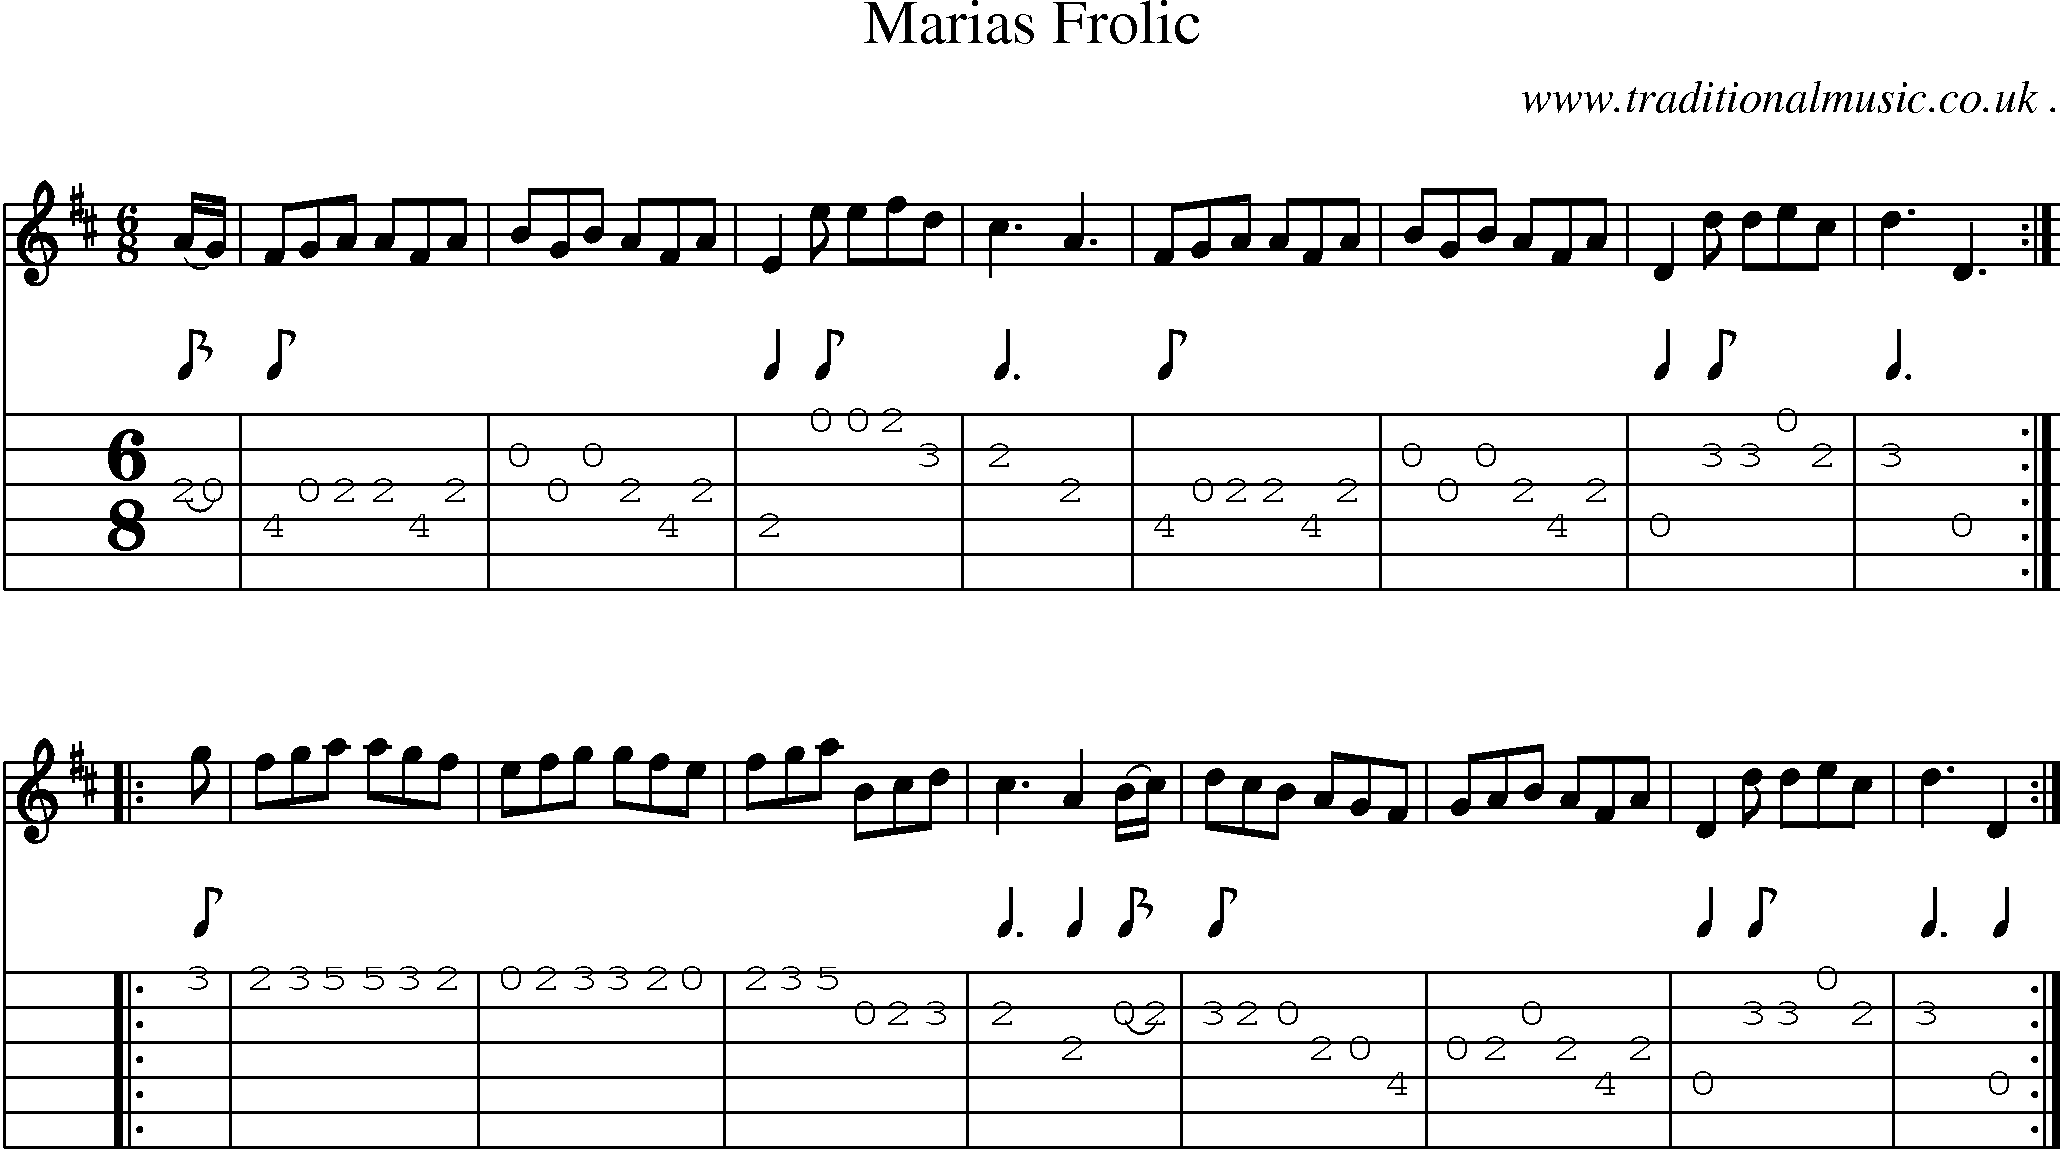 Sheet-Music and Guitar Tabs for Marias Frolic